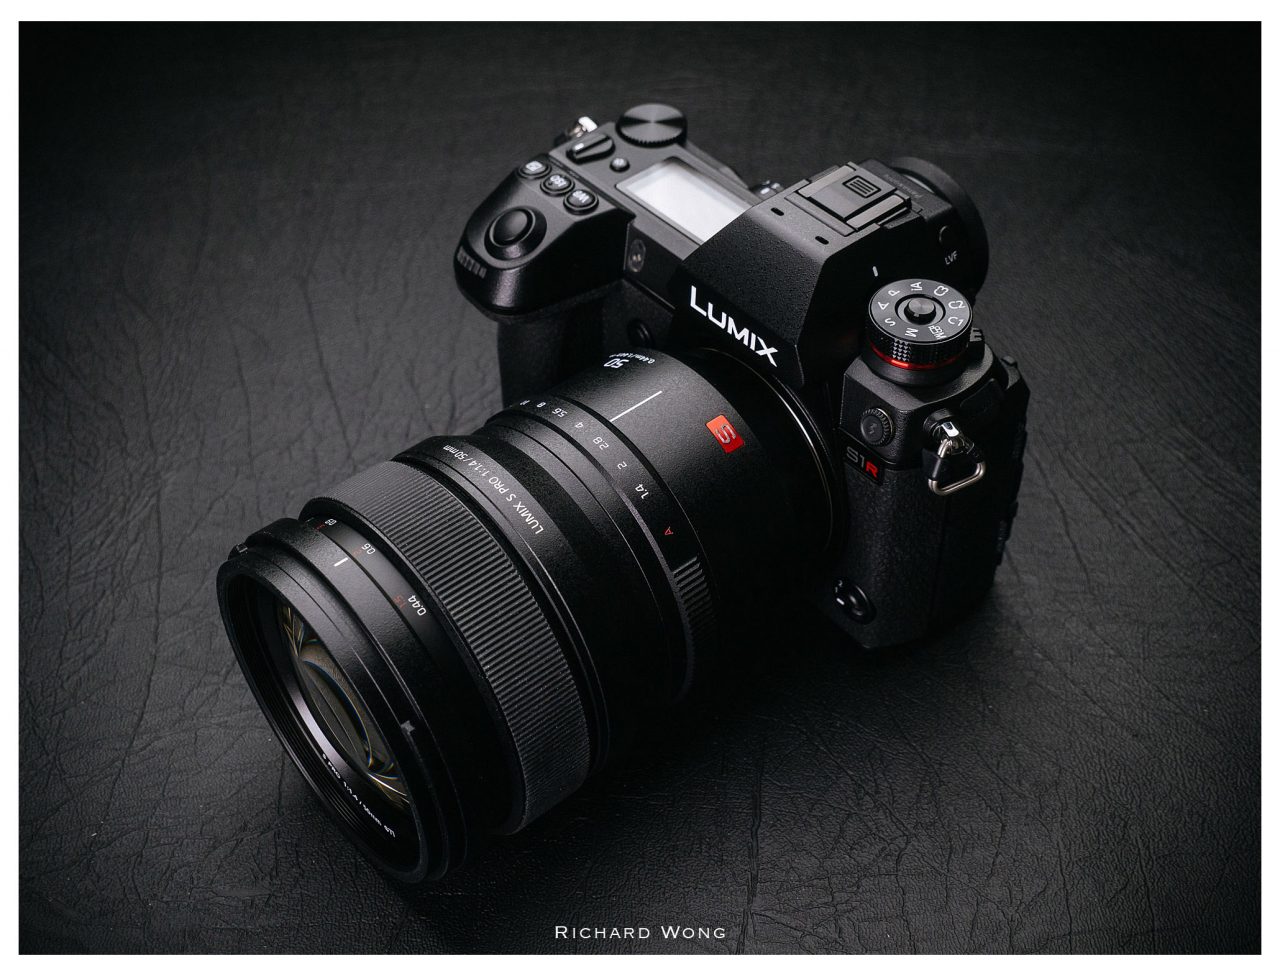 roddel Luidruchtig Keelholte Panasonic Lumix S Pro 50mm f/1.4 Review – Review By Richard